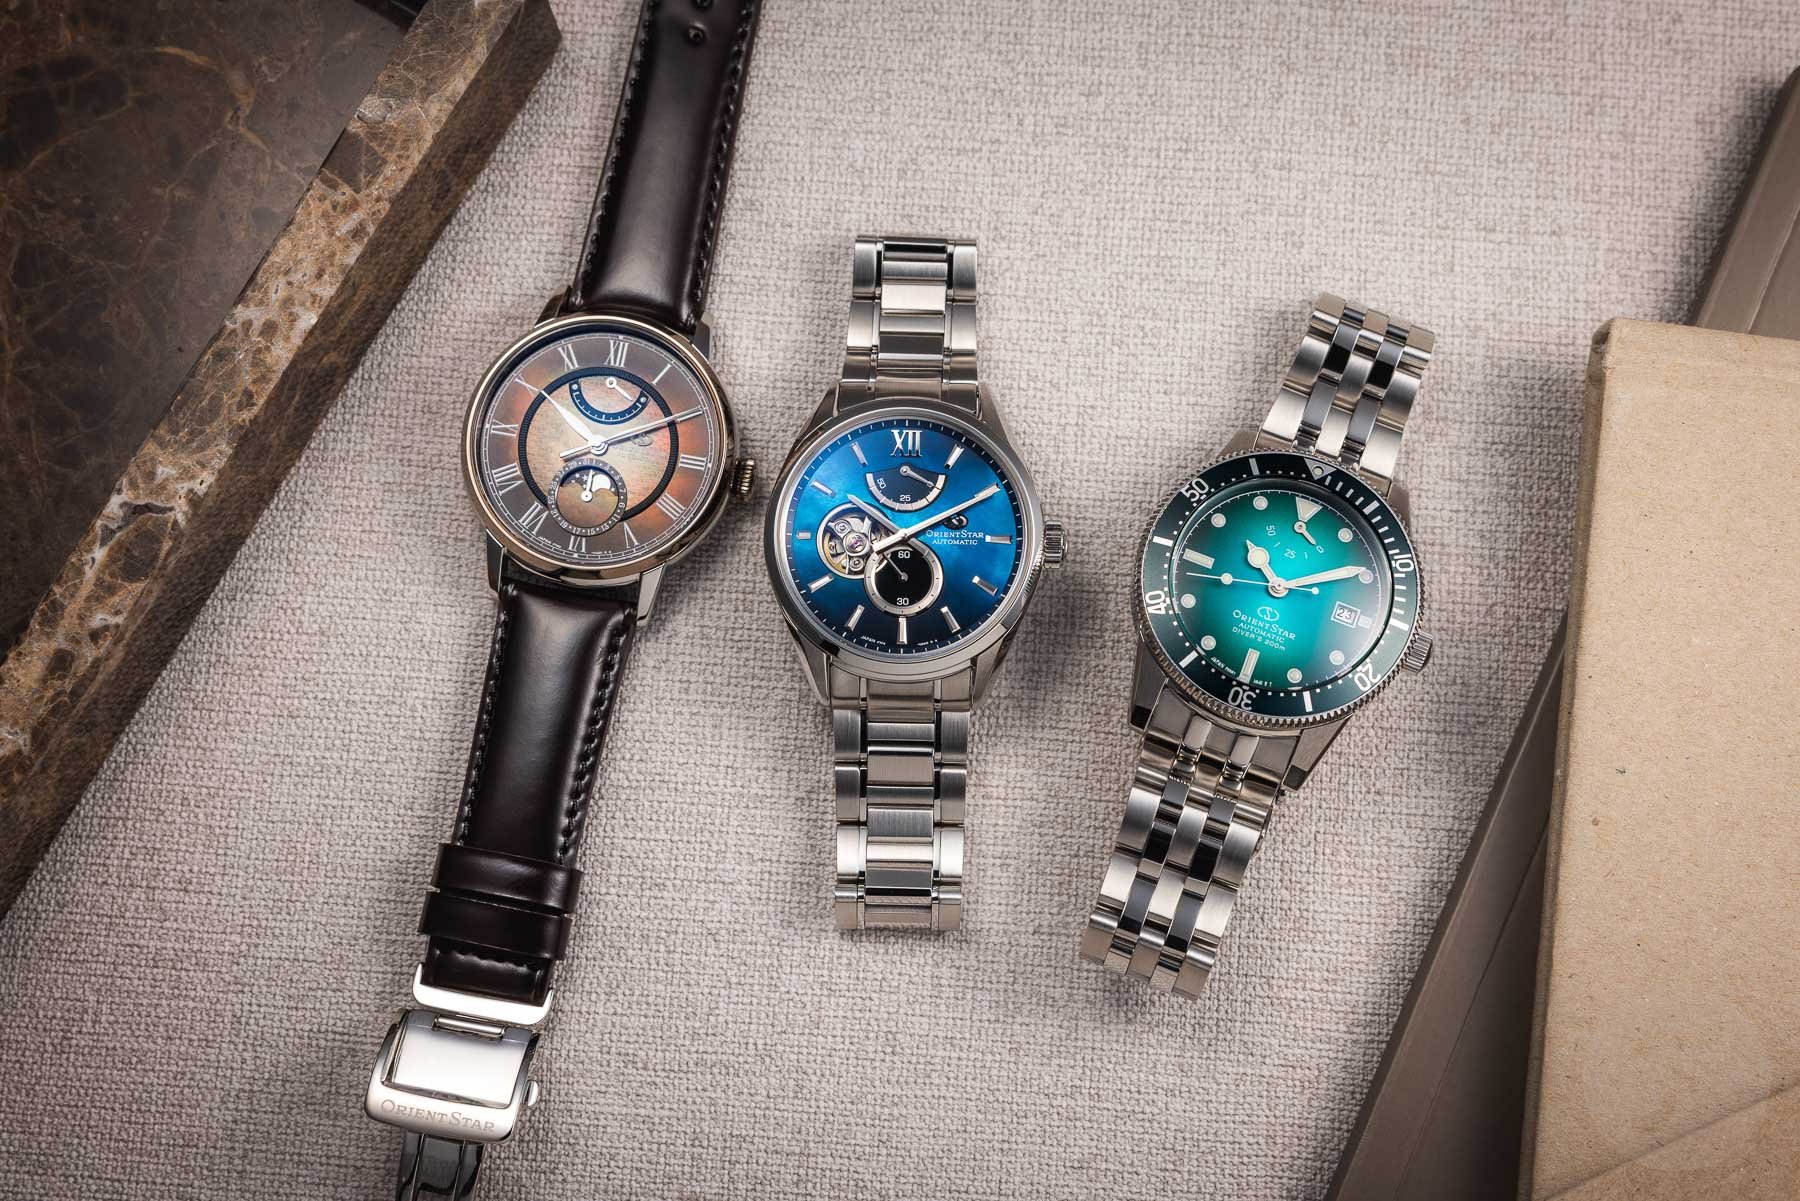 Introducing: The Orient Star M Collections — A Different Take On Japanese Top-Shelf Horology